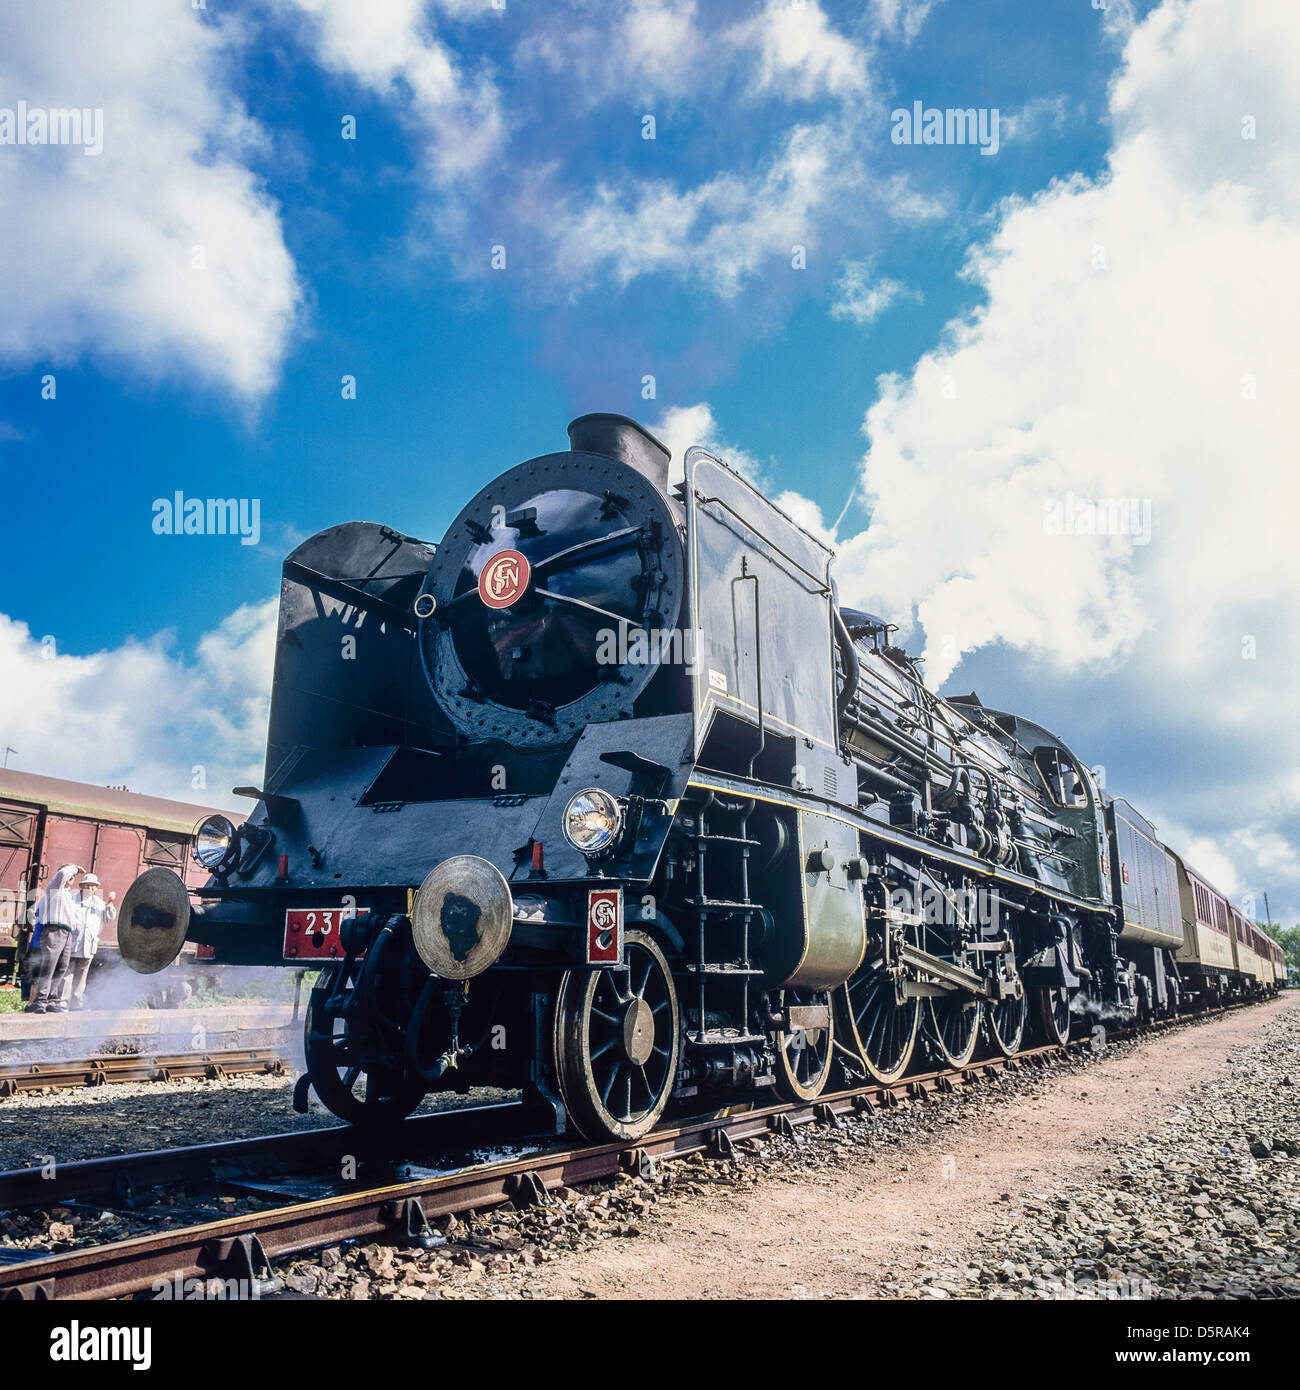 Historic steam locomotive 'Pacific PLM 231 K 8' of 'Paimpol-Pontrieux' train Brittany France Europe Stock Photo